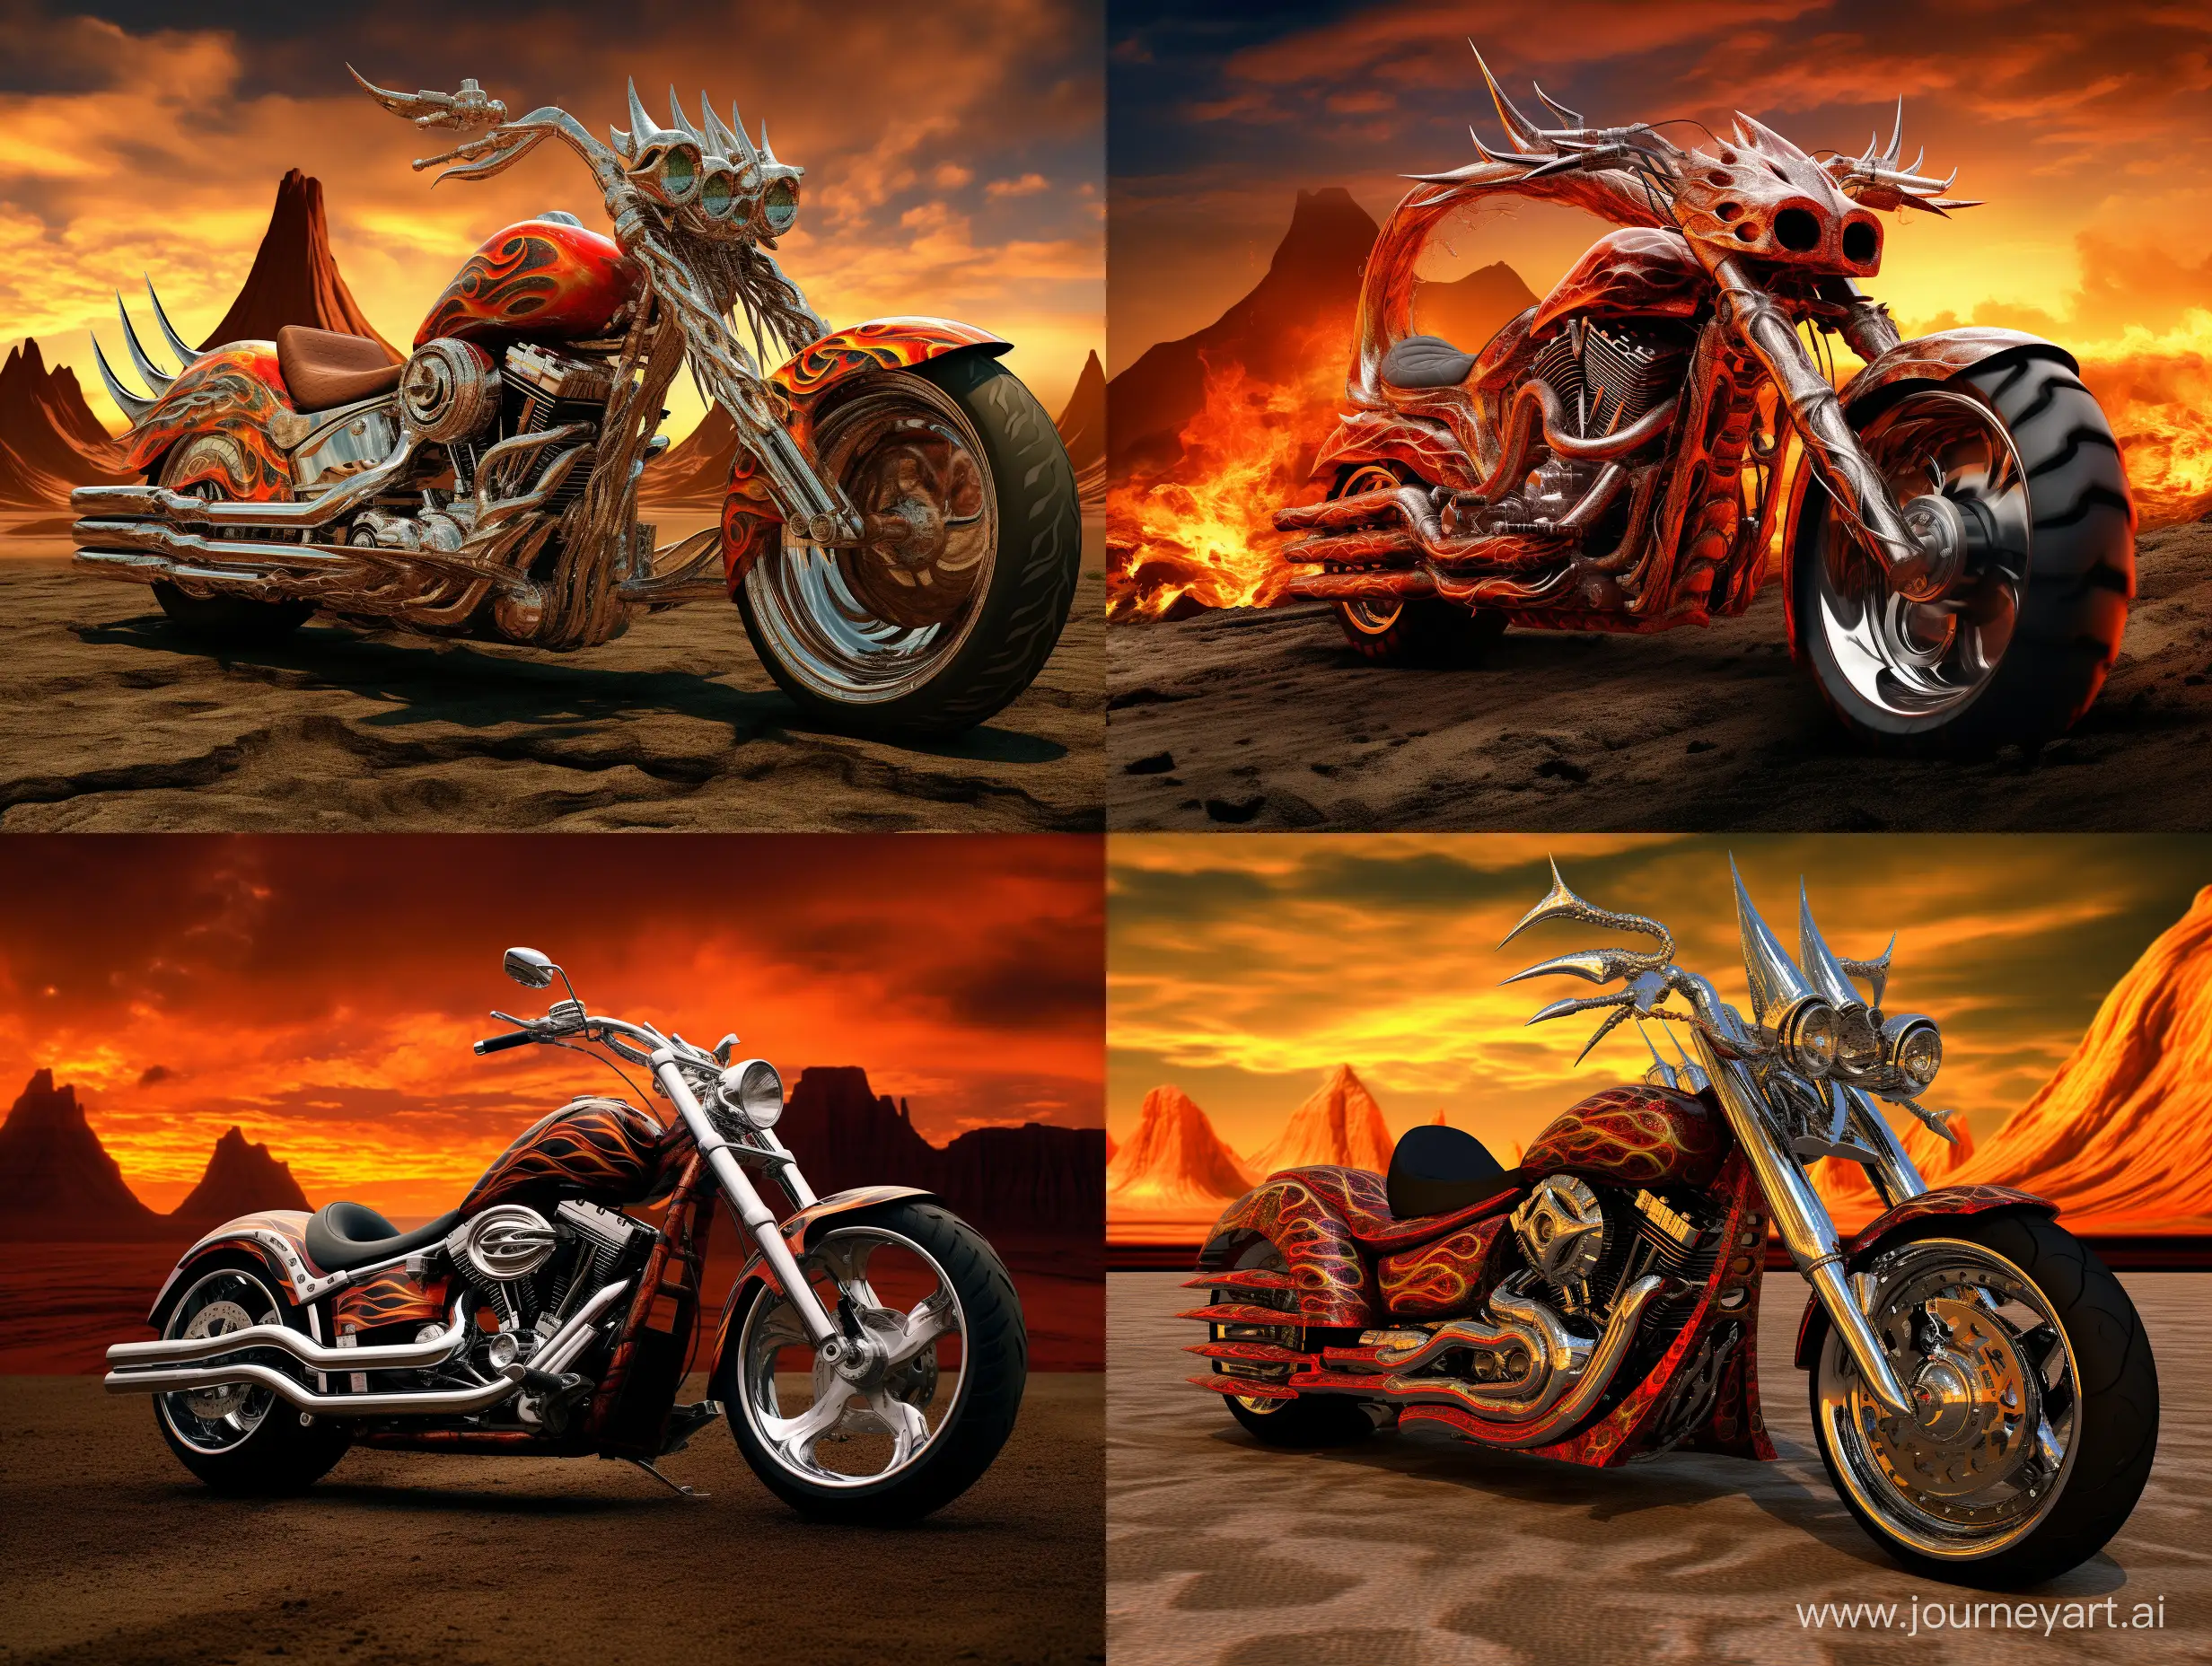 Chrome-LowRider-Devil-Motorcycle-Over-Fire-Ramp-in-Stormy-Desert